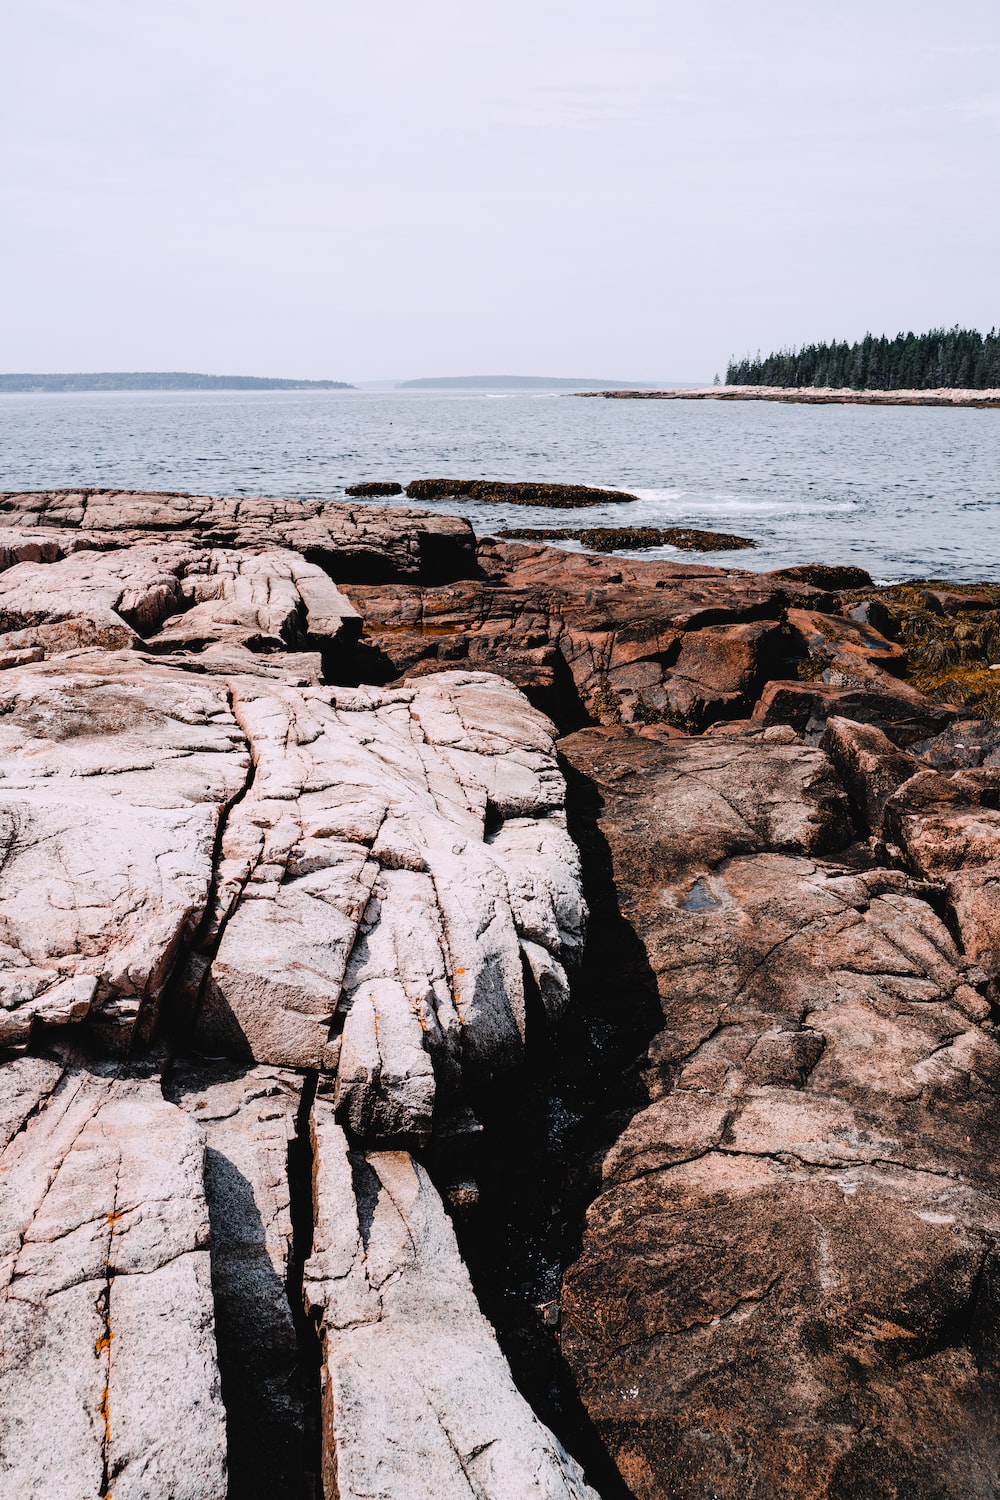  Explore the Natural Beauty of Acadia National Park on Your Next Vacation